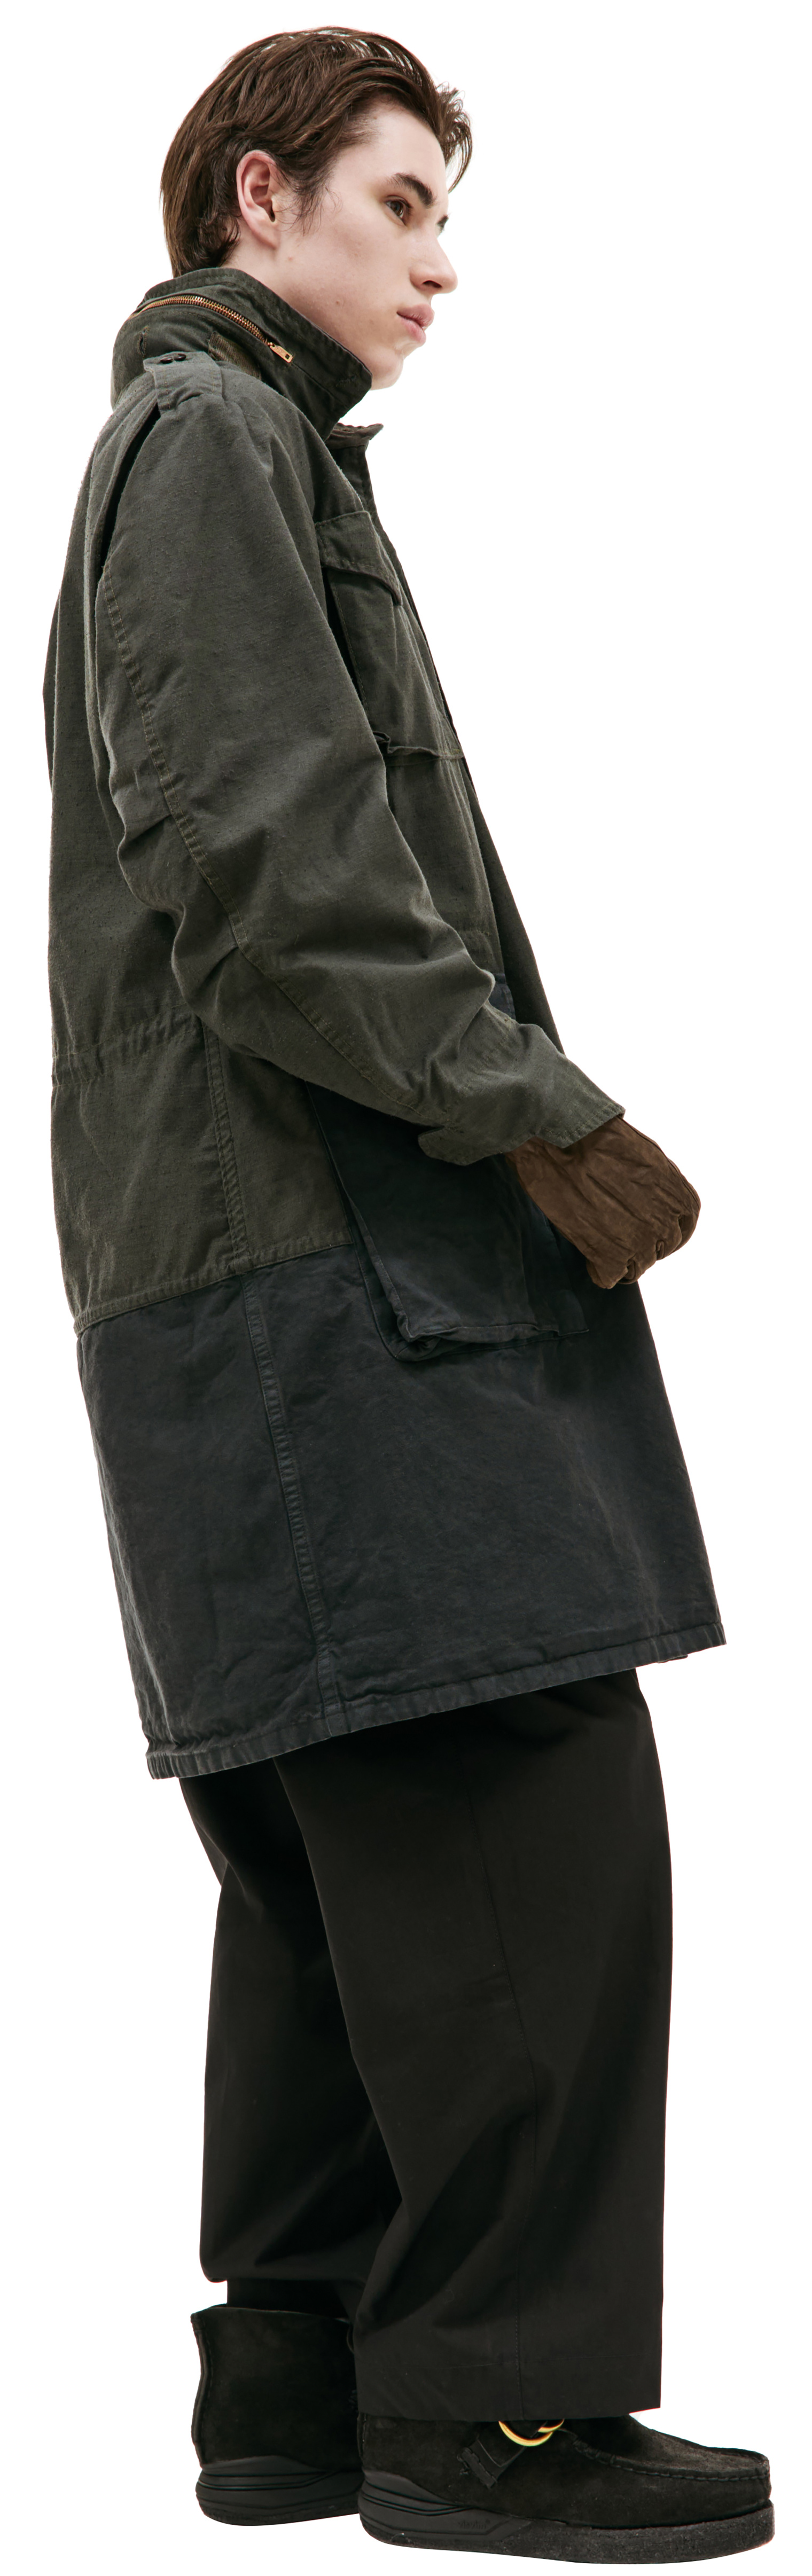 OAMC Re:Work coat with pockets